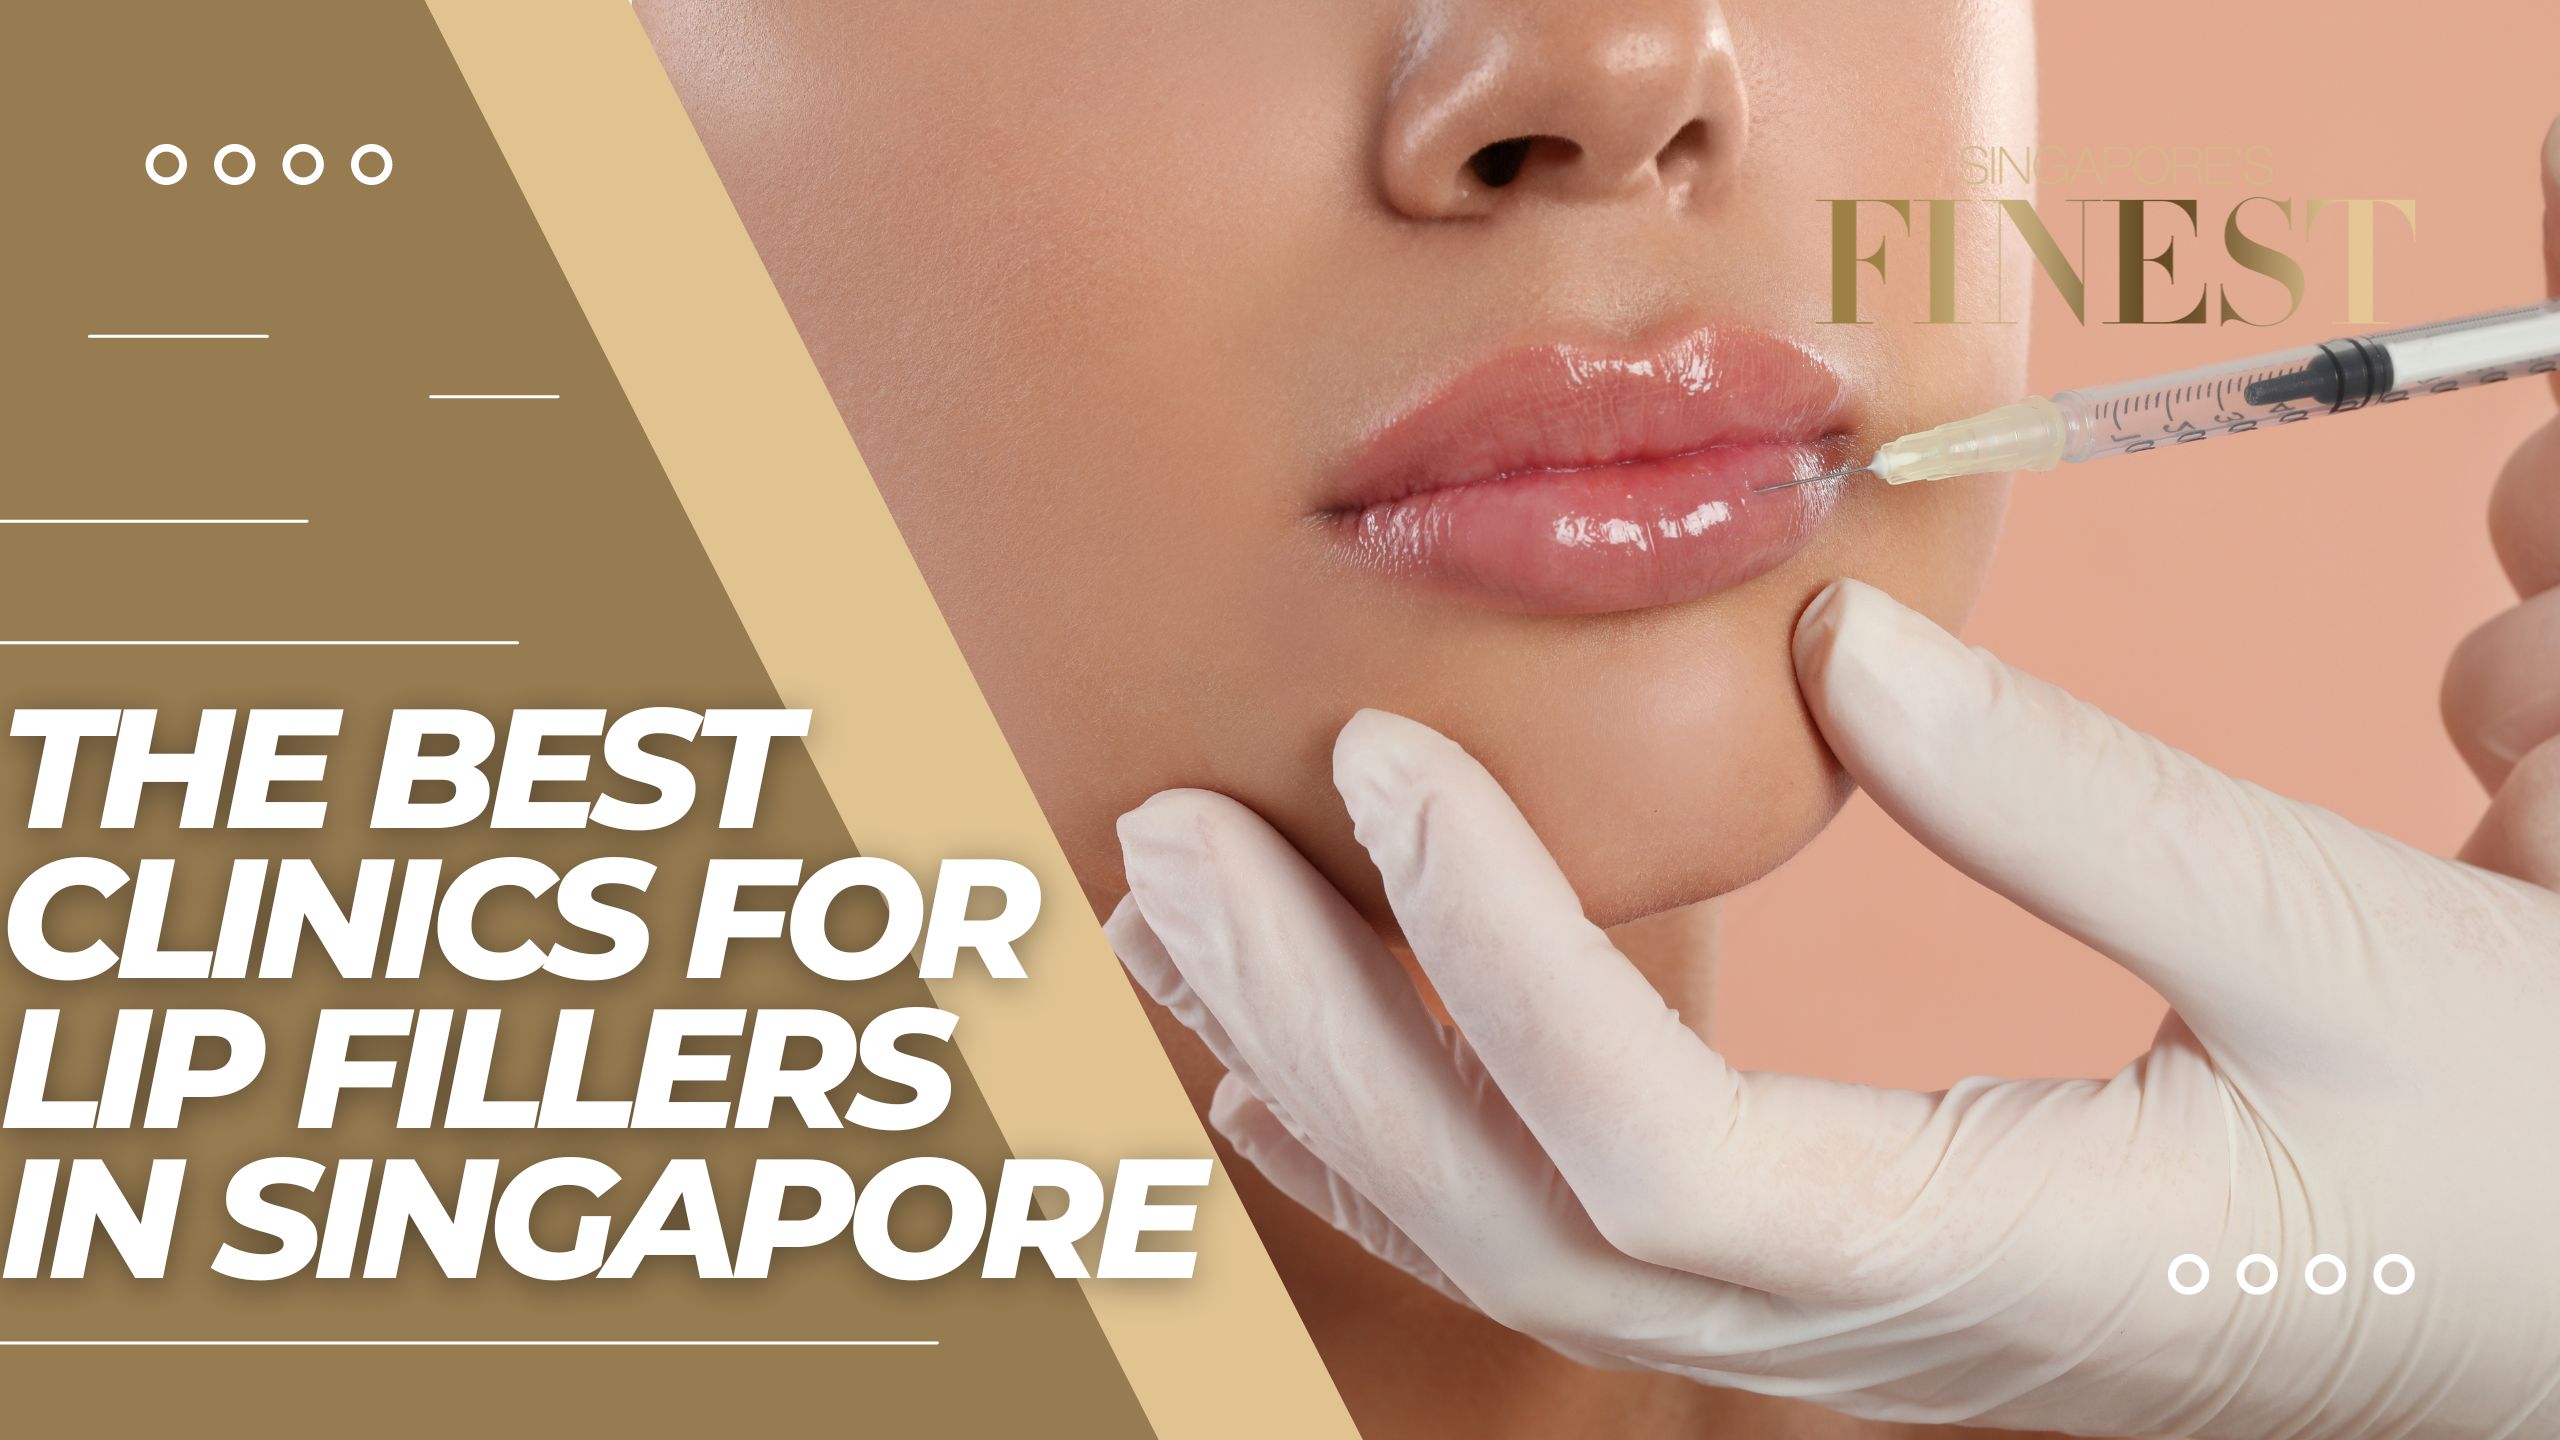 The Finest Clinics for Lip Fillers in Singapore